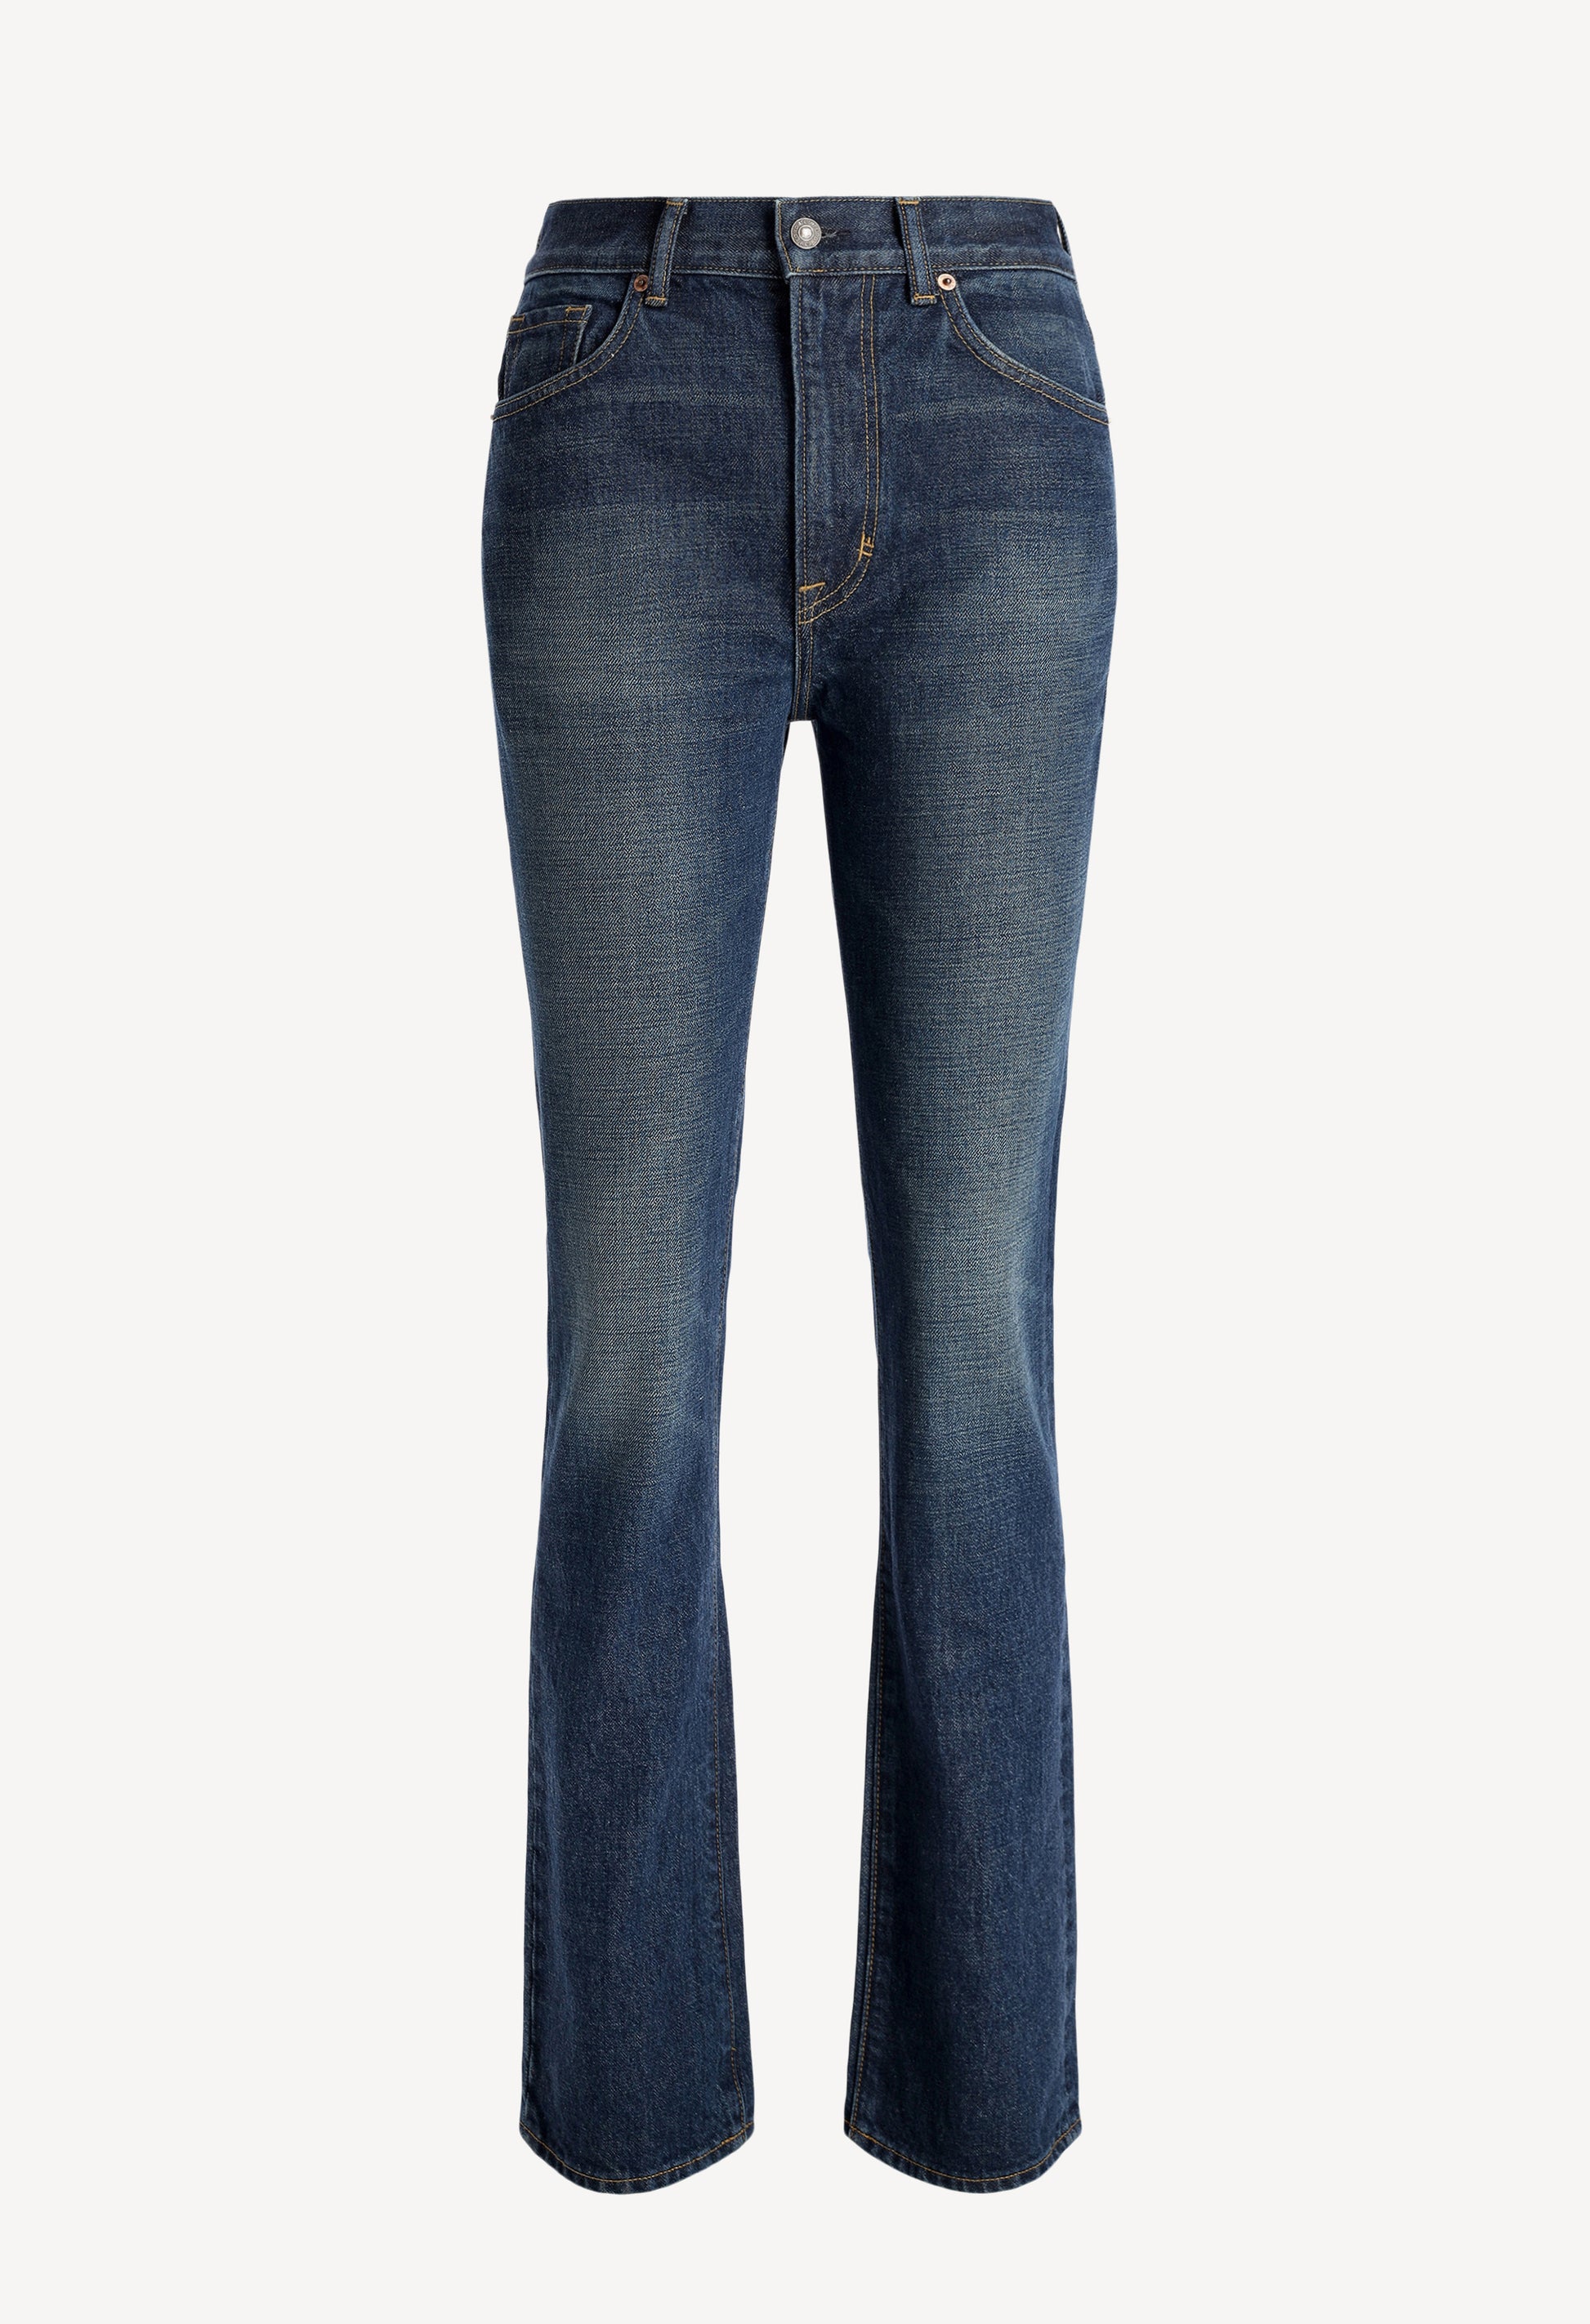 Jeans Stone Washed in Mid BlueTom Ford - Anita Hass